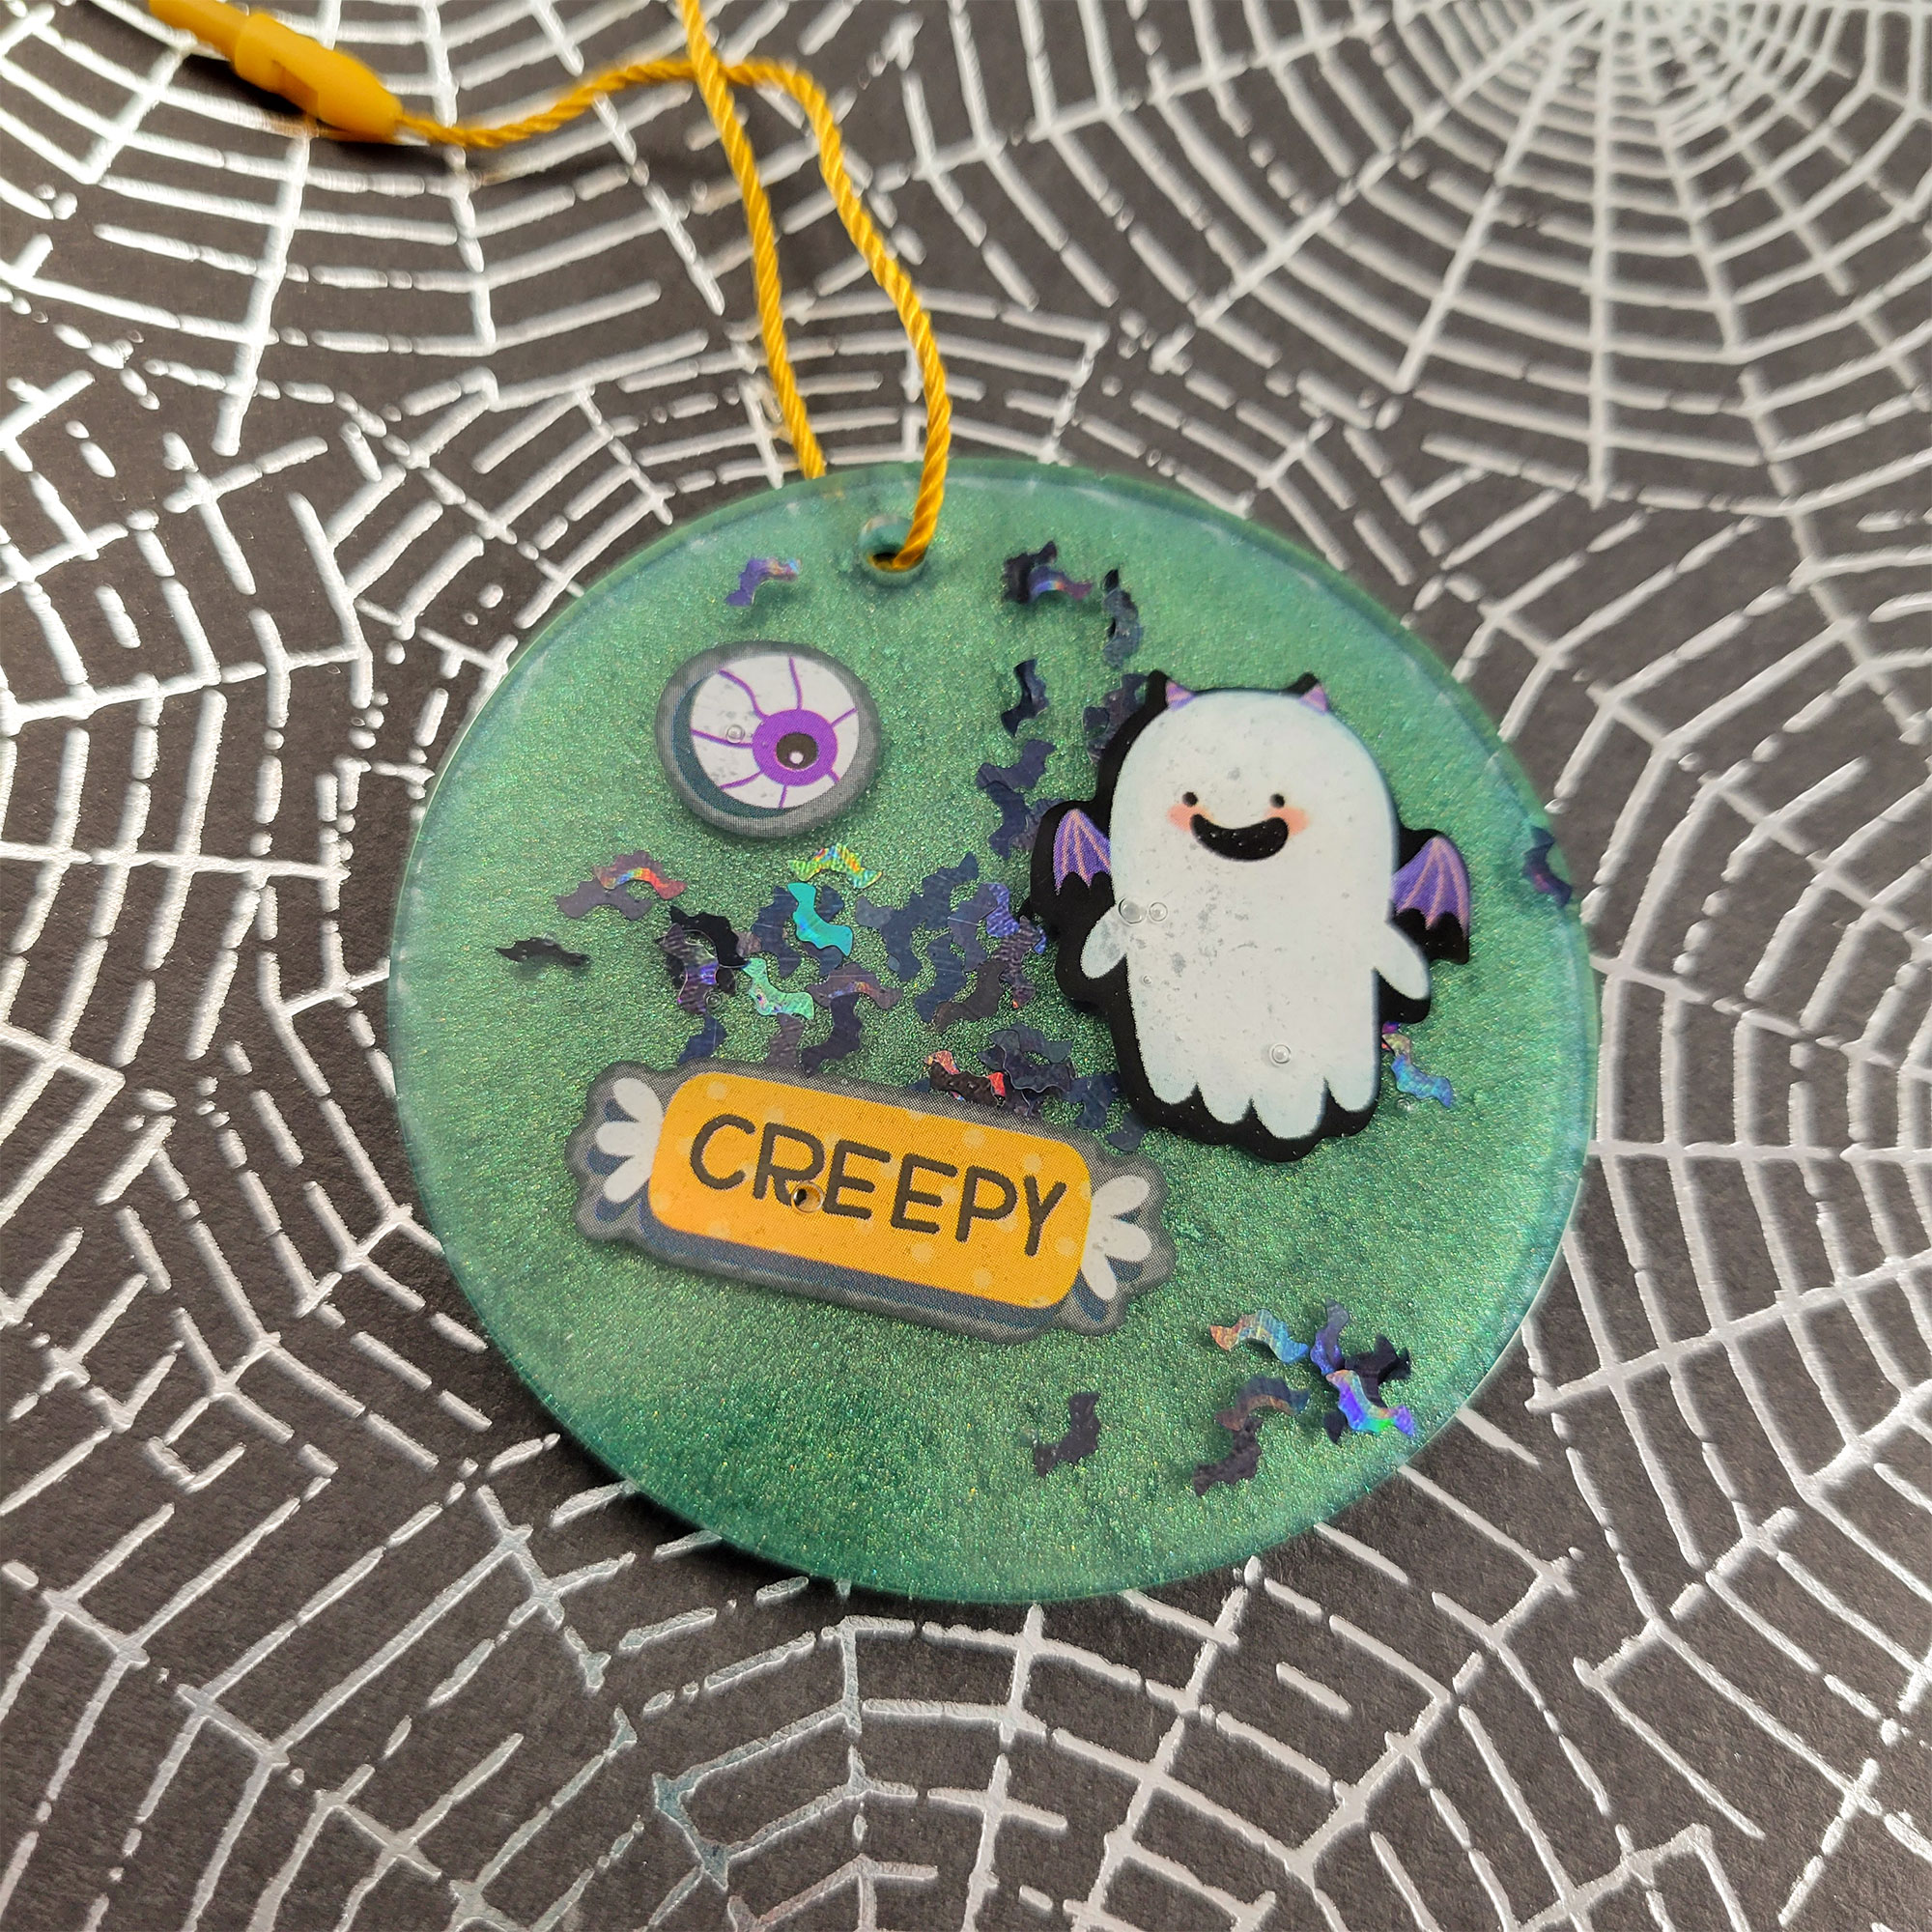 Spooky Round Ornaments by Wilde Designs